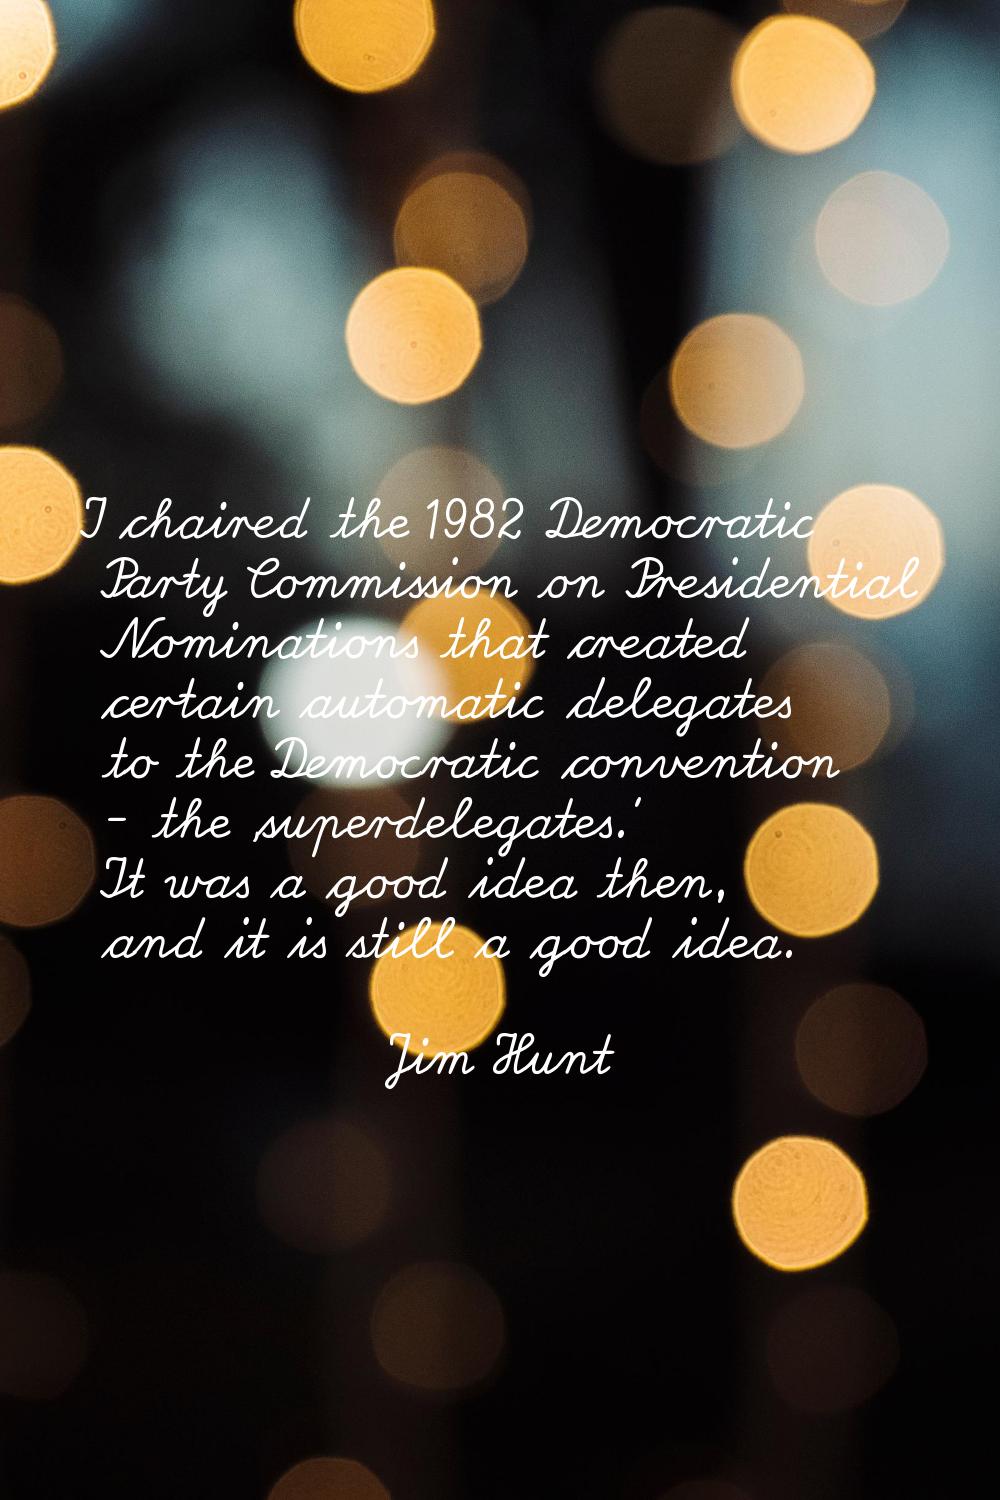 I chaired the 1982 Democratic Party Commission on Presidential Nominations that created certain aut